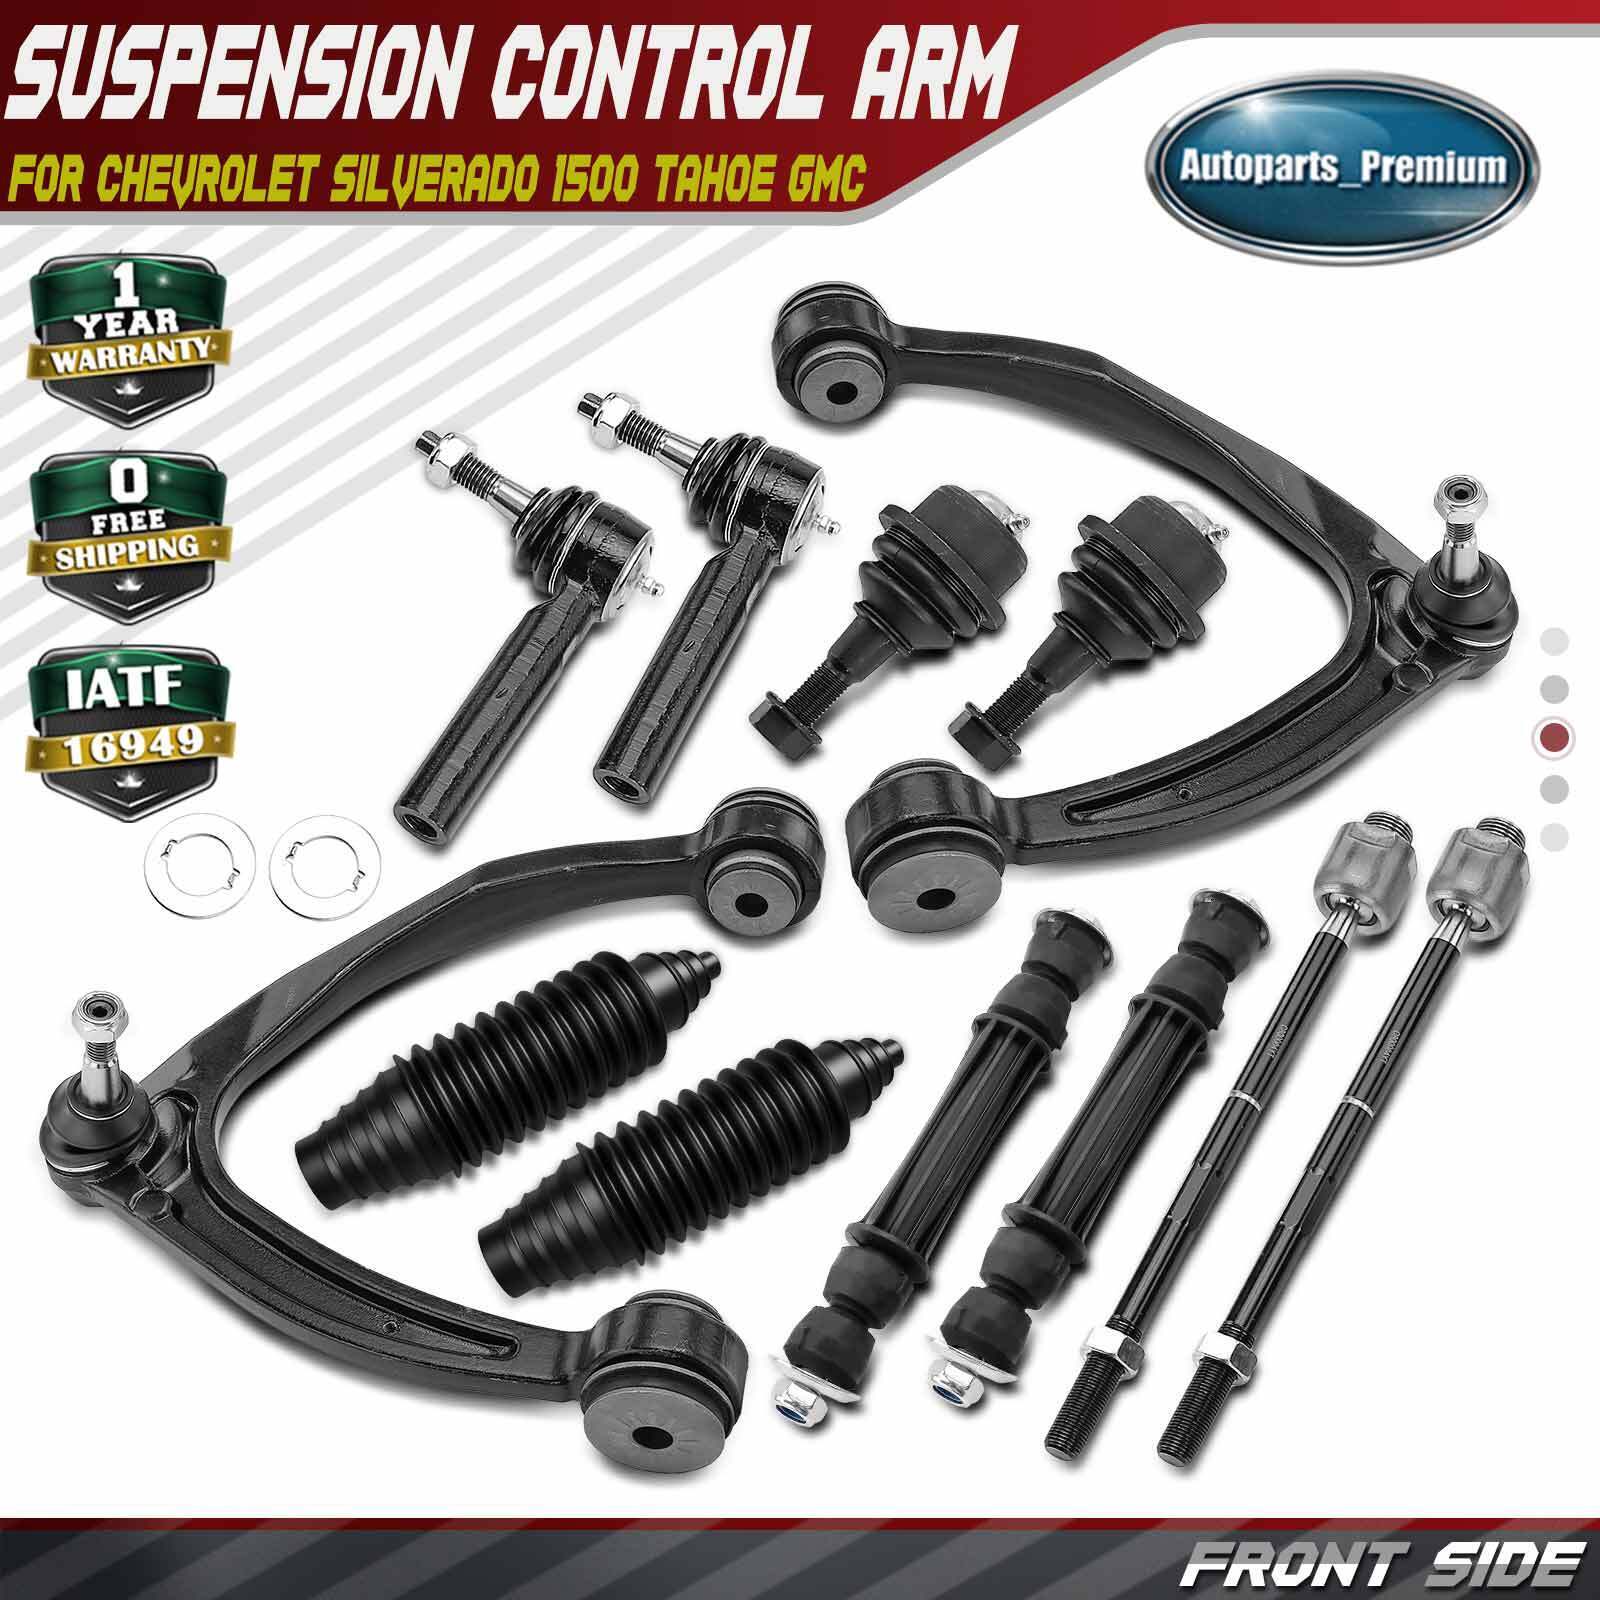 12pc Front Upper Control Arm Ball Joint Sway Bar Tie Rod for Chevy Silverado GMC